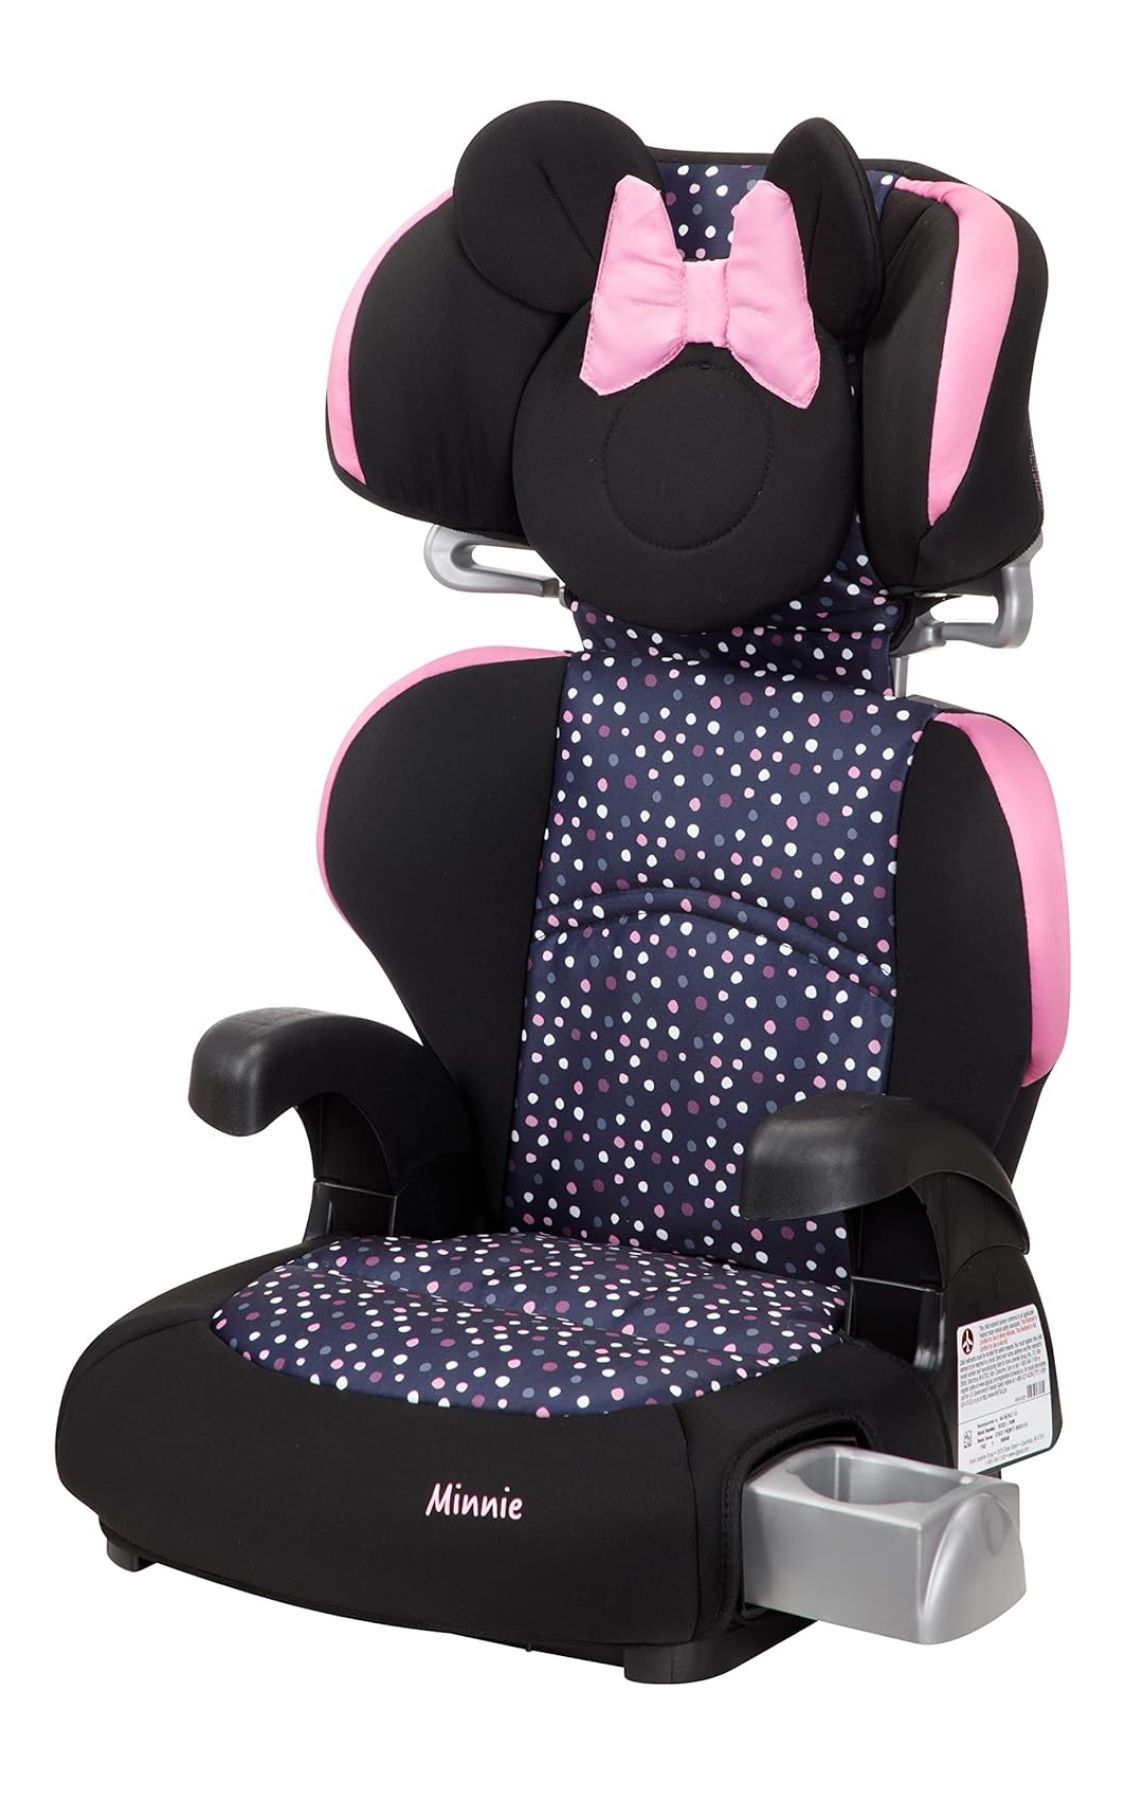 Disney Baby Pronto! Belt-Positioning Booster seat